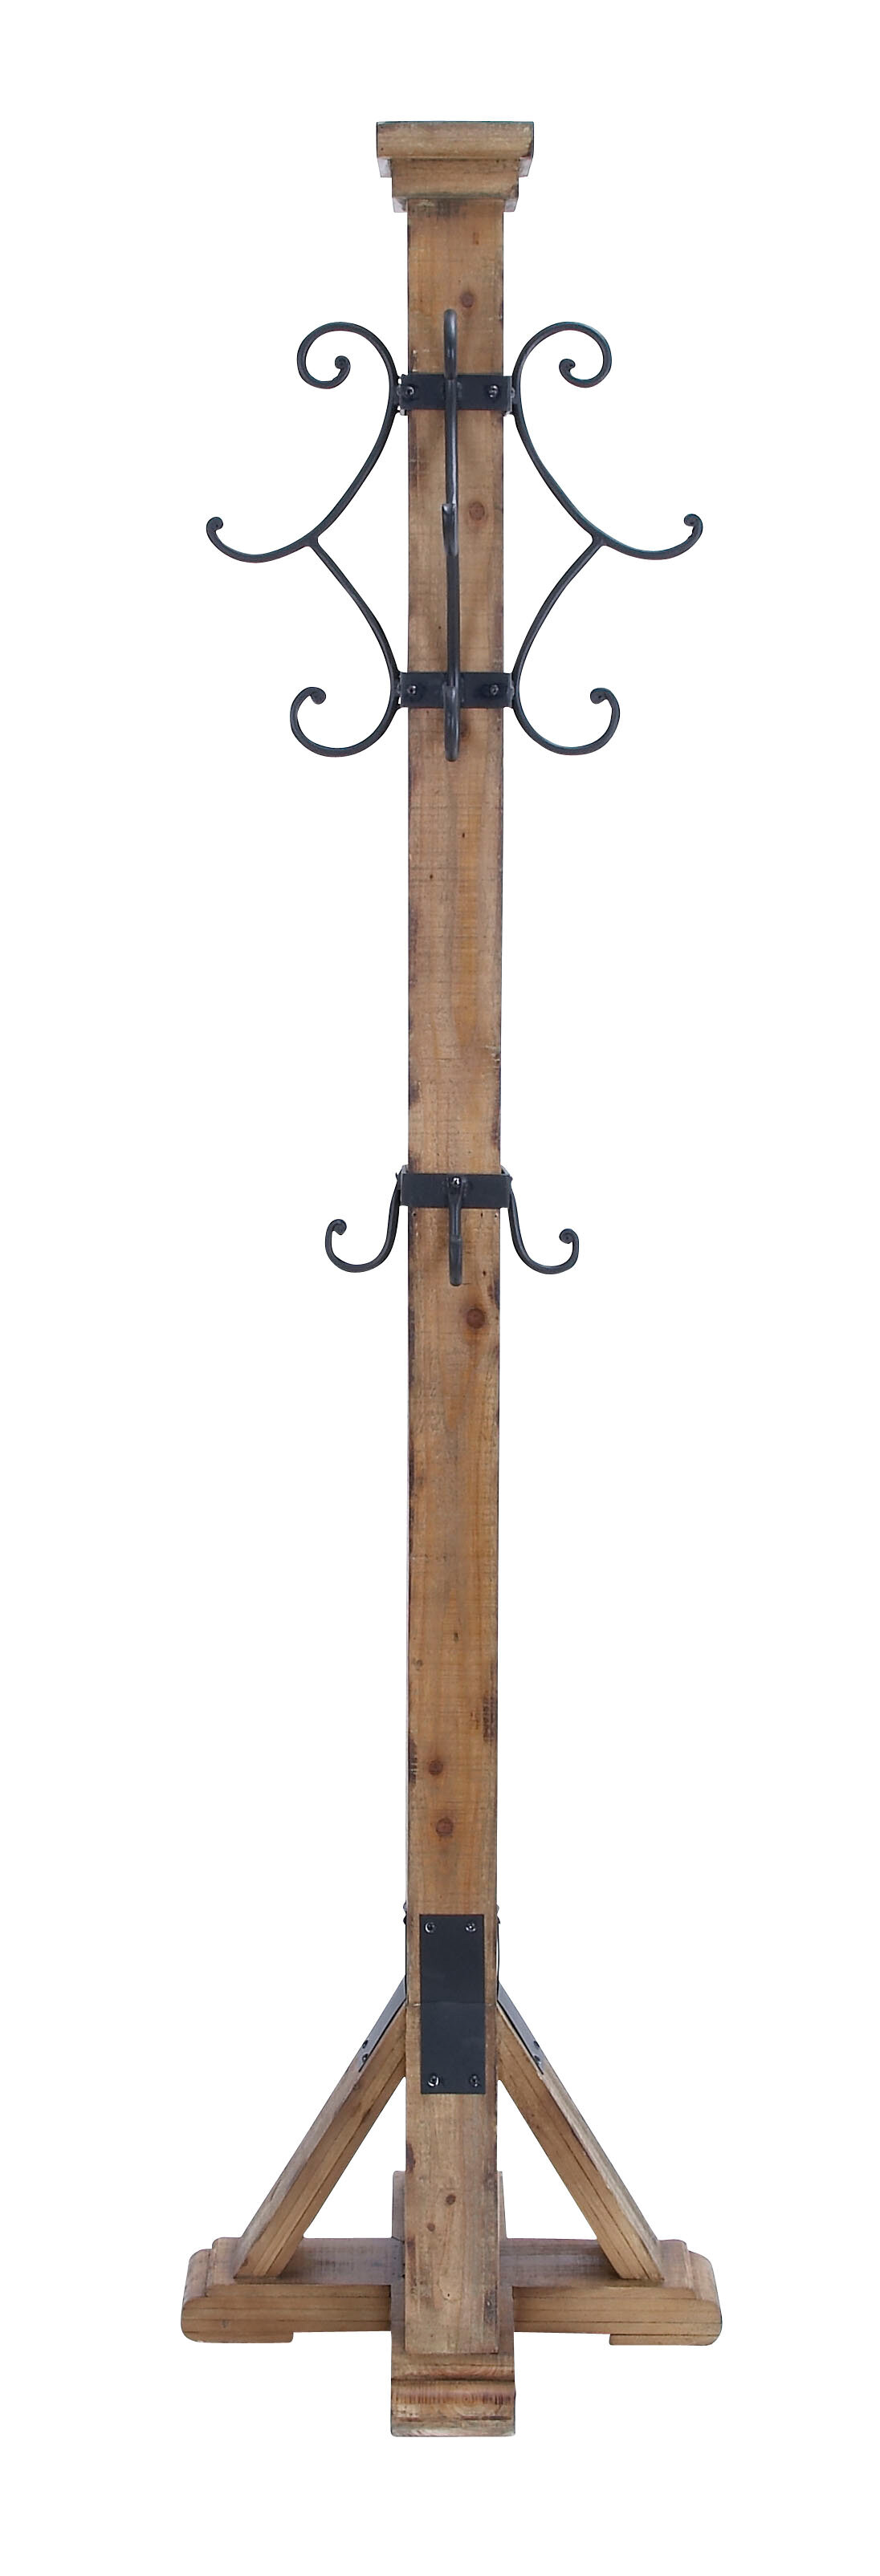 Wrought Iron Metal Wall Mount Coat Rack With 5 Hooks Fleur De Lis Scroll  Accent